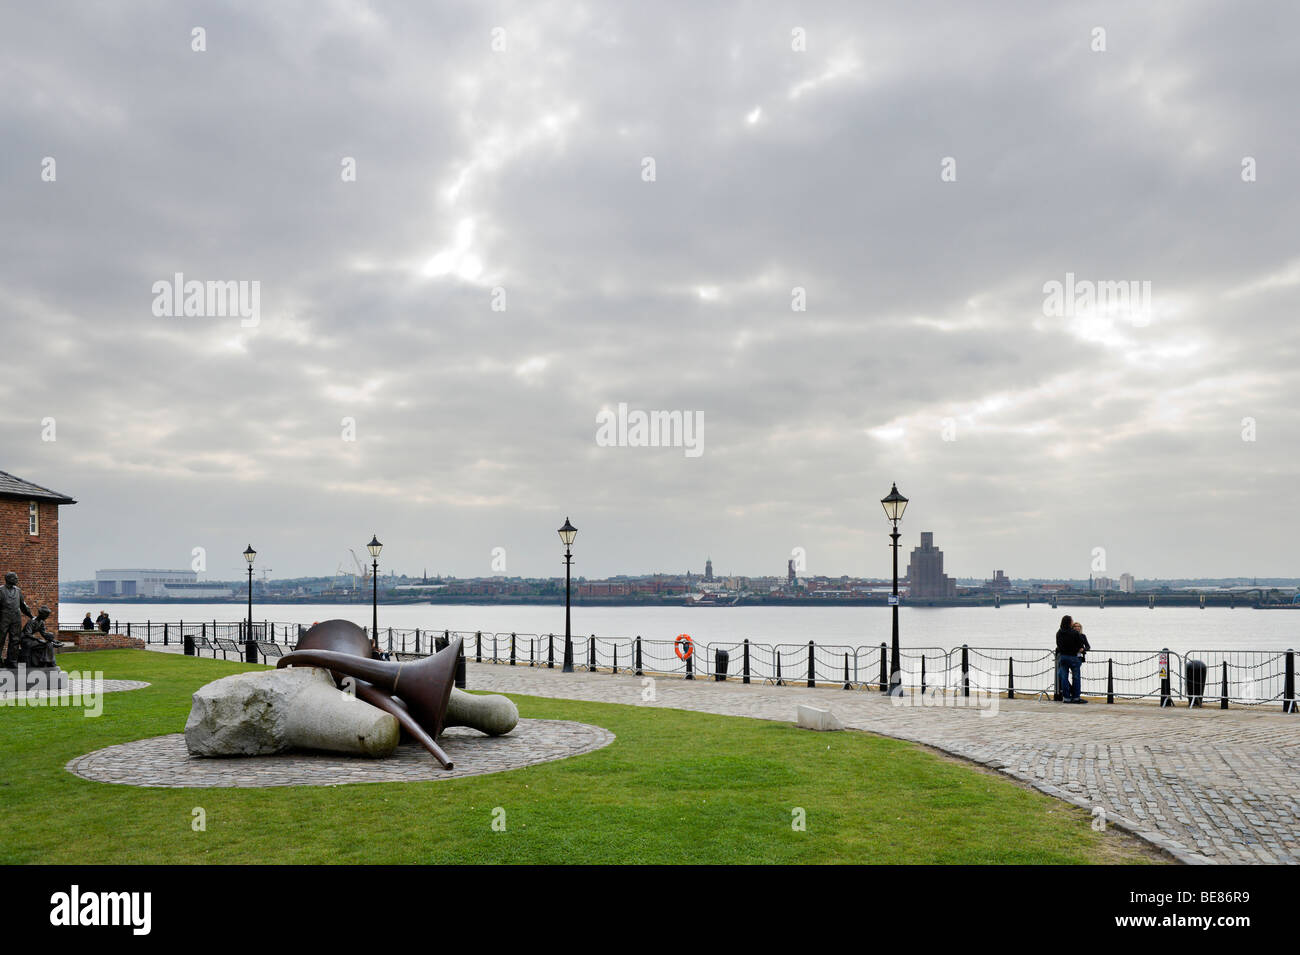 View across the River Mersey towards the Wirral peninsula from the Albert Dock, Liverpool, Merseyside, England Stock Photo